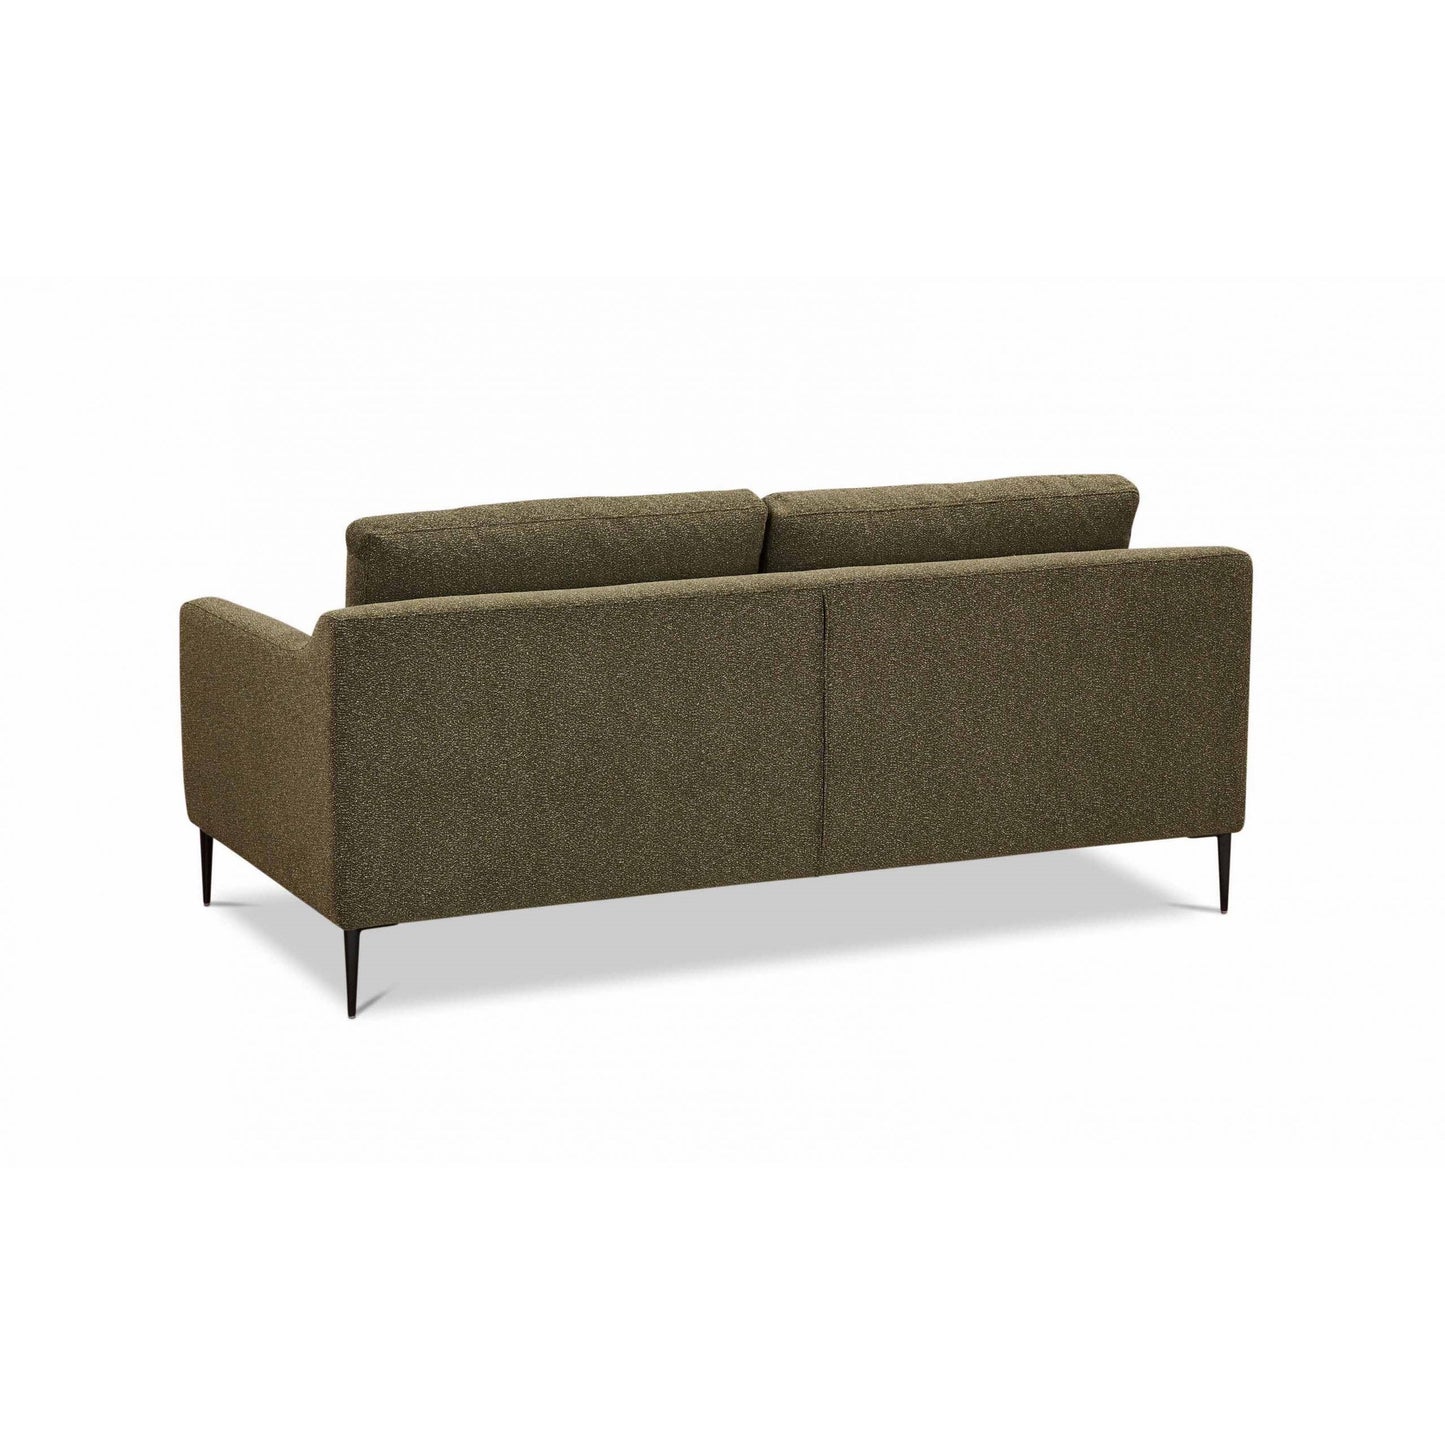 Jacques Sofa by Molmic available from Make Your House A Home, Furniture Store located in Bendigo, Victoria. Australian Made in Melbourne.